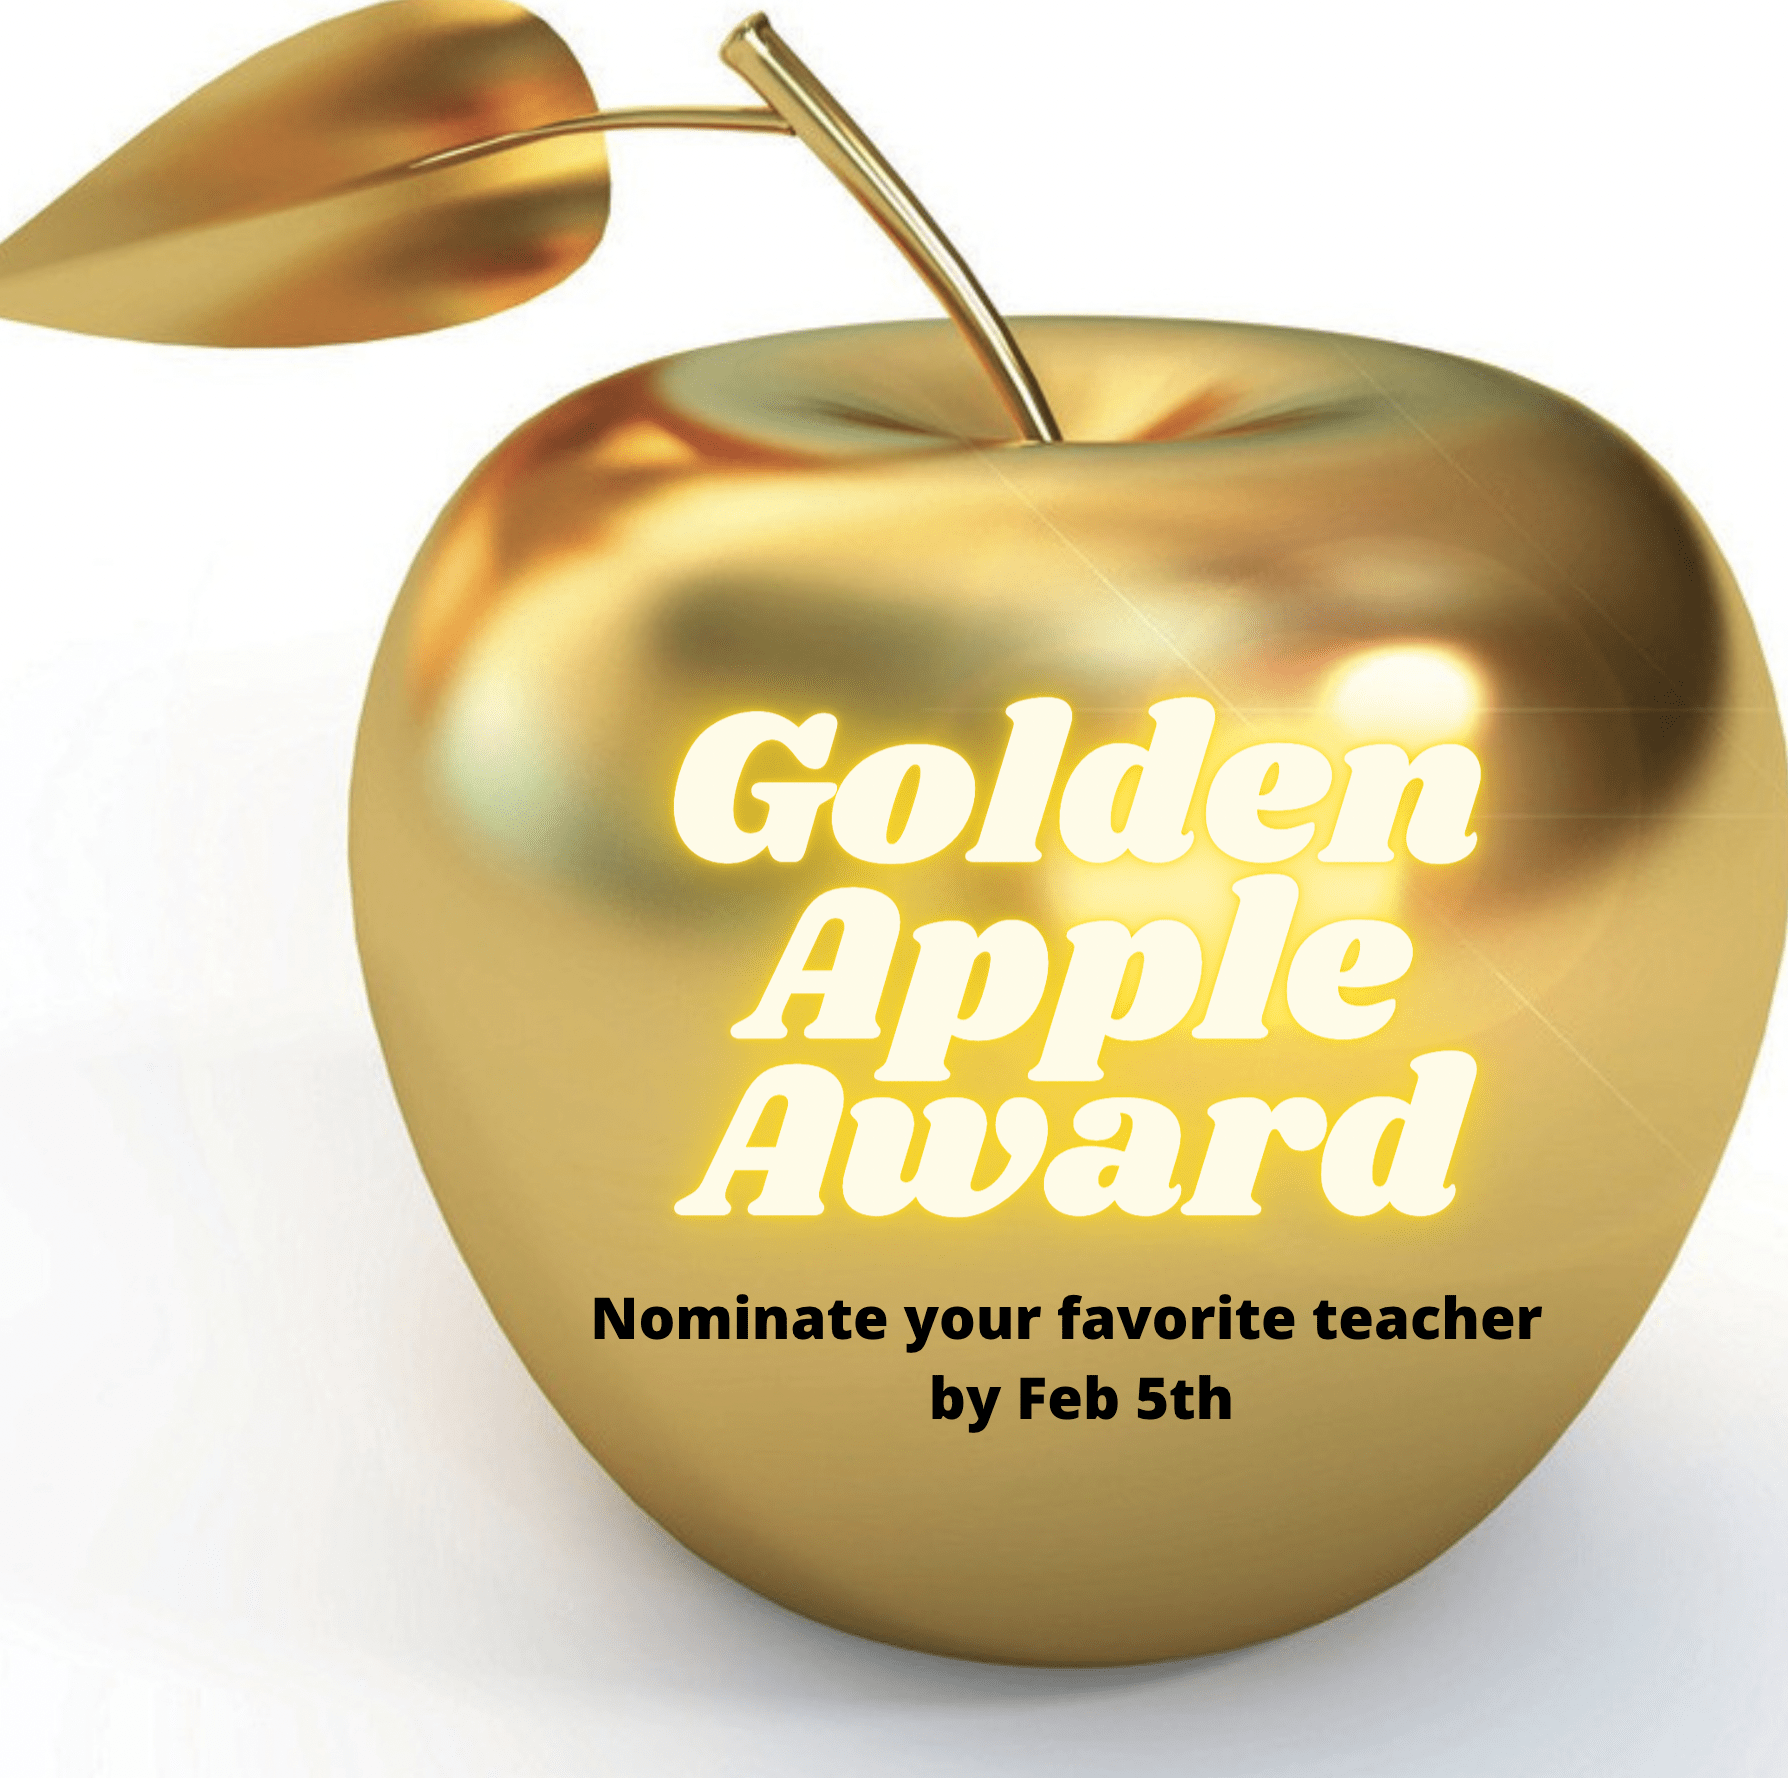 Students Nominate For The Golden Apple Award By Feb 5th Timpview High School